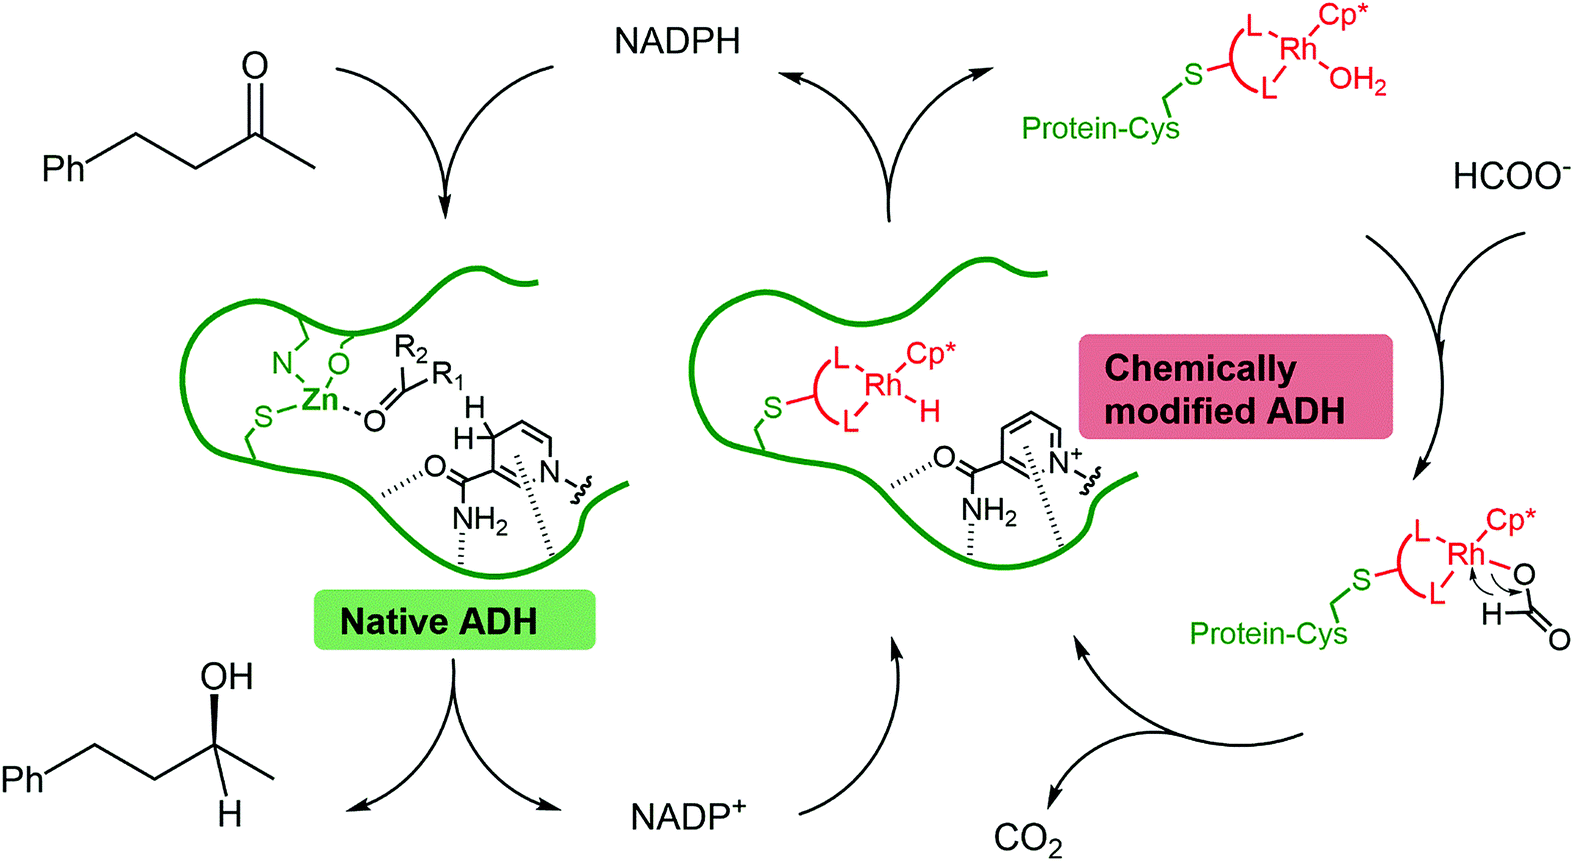 Synthesis of chiral alcohols via two interconnected cycles: the wild type enzyme (native ADH) reduces the ketone to the alcohol using NADPH as a reducing agent.利用含有铑活性位点（化学修饰的ADH）的突变酶，以甲酸为末端还原剂，对NADPH进行再生。Alcohol dehydrogenase